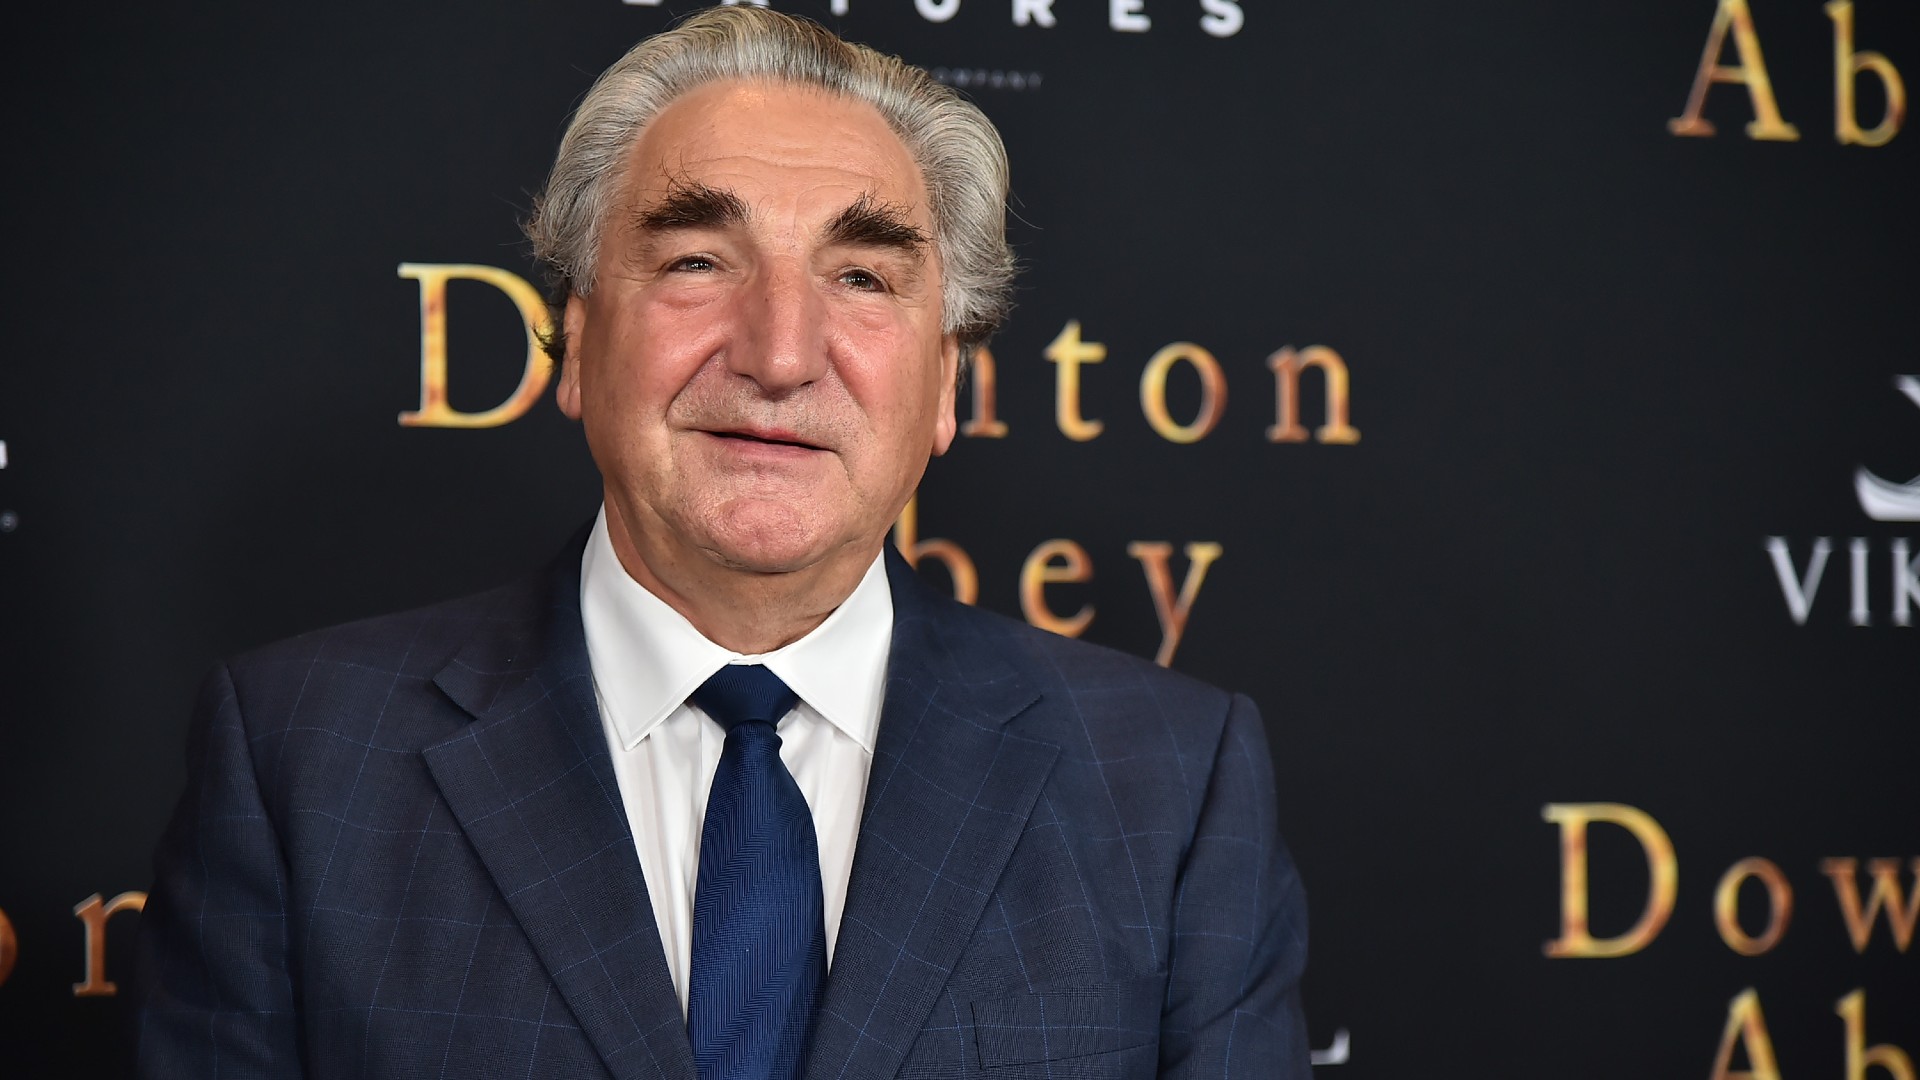 10 Things You Never Knew About 'Downton Abbey' Star Jim Carter